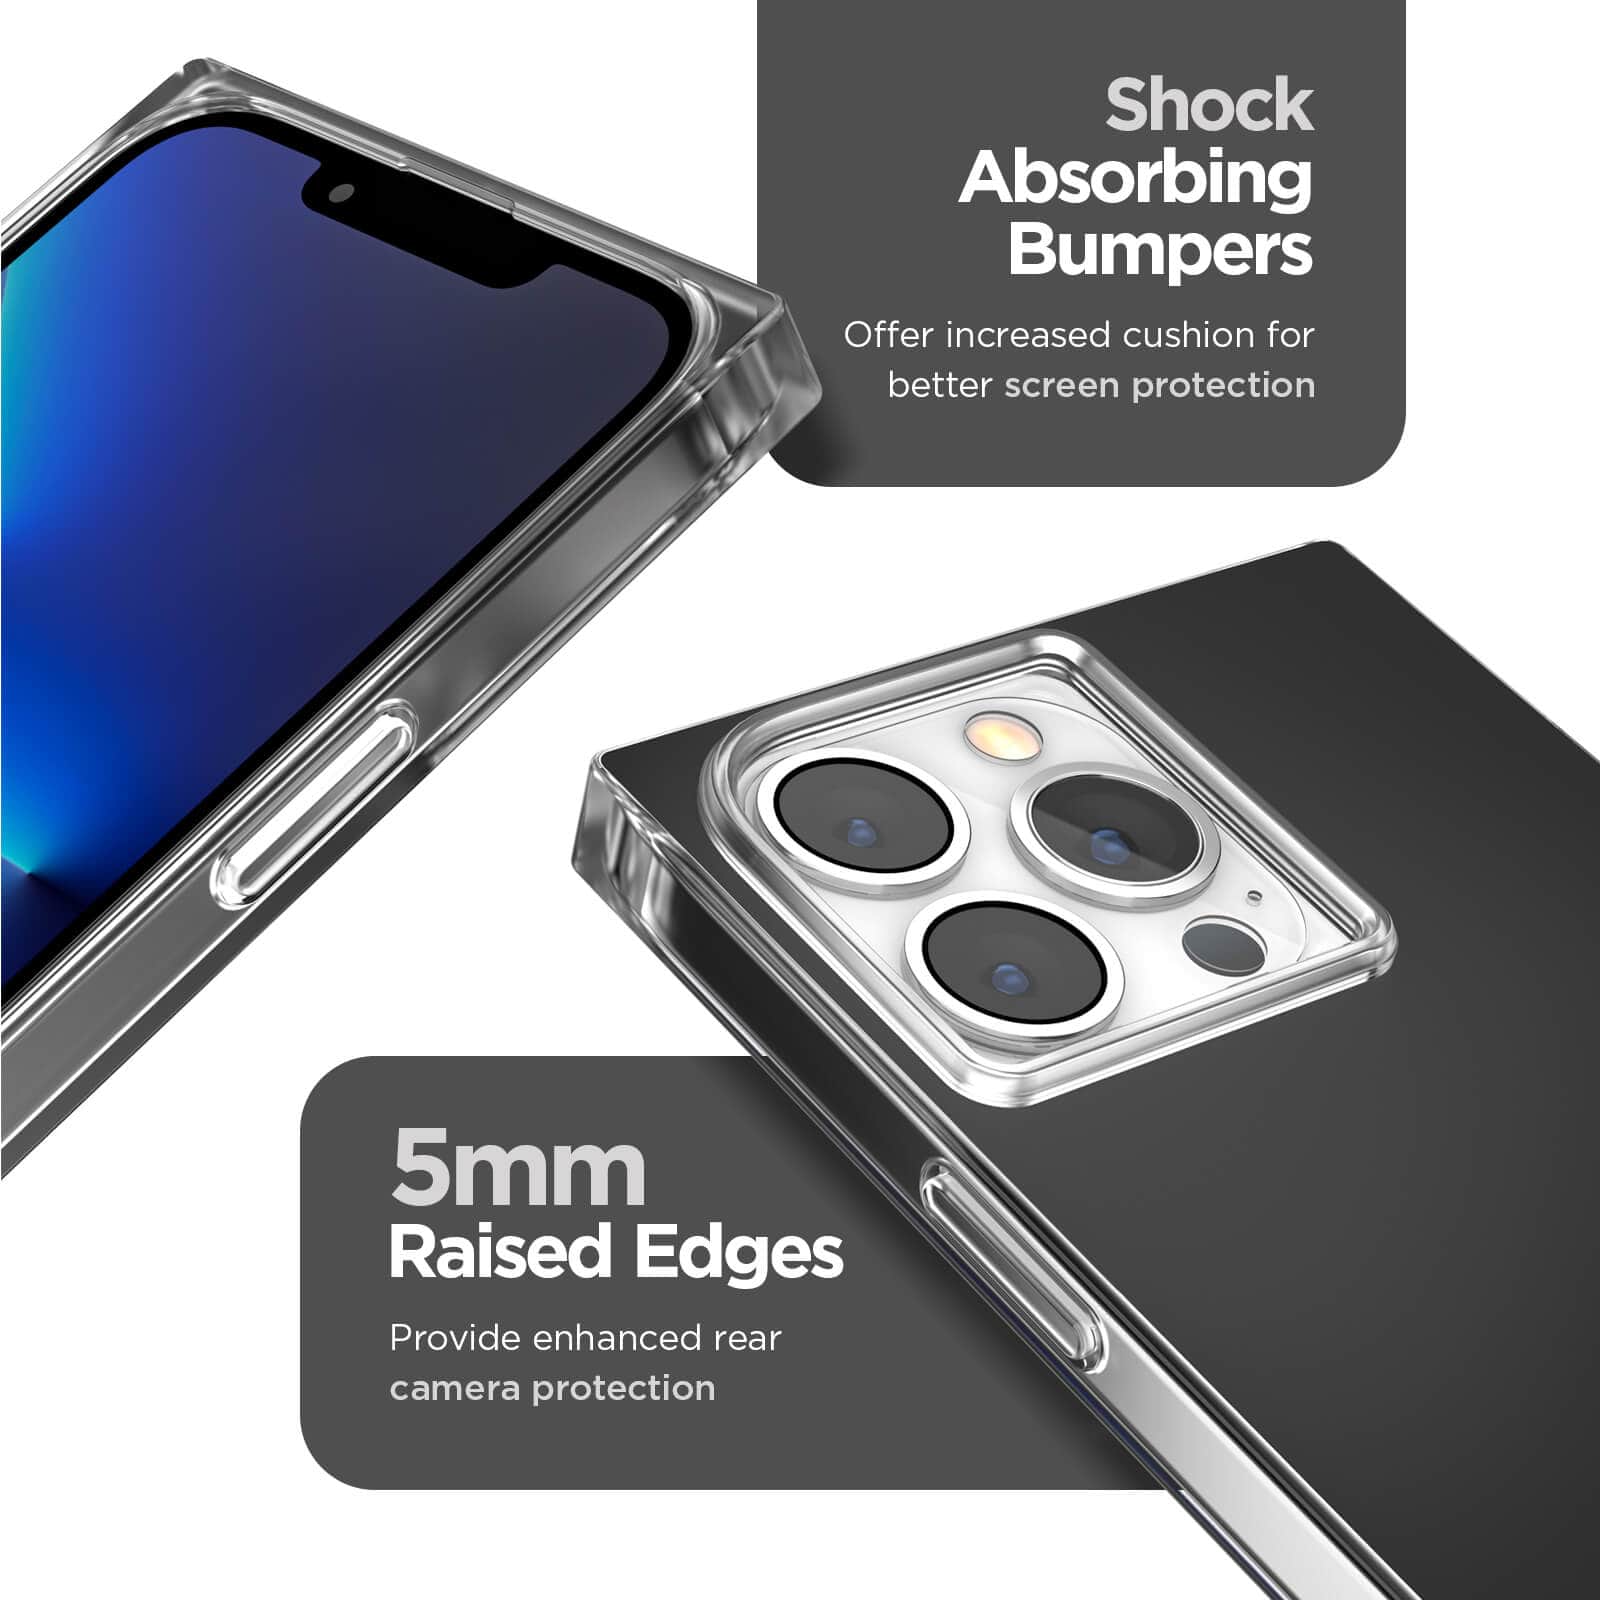 Shock absorbing bumpers offer increased cushion for better screen protection. 5mm raised edges provide enhanced rear camera protection. color::Black